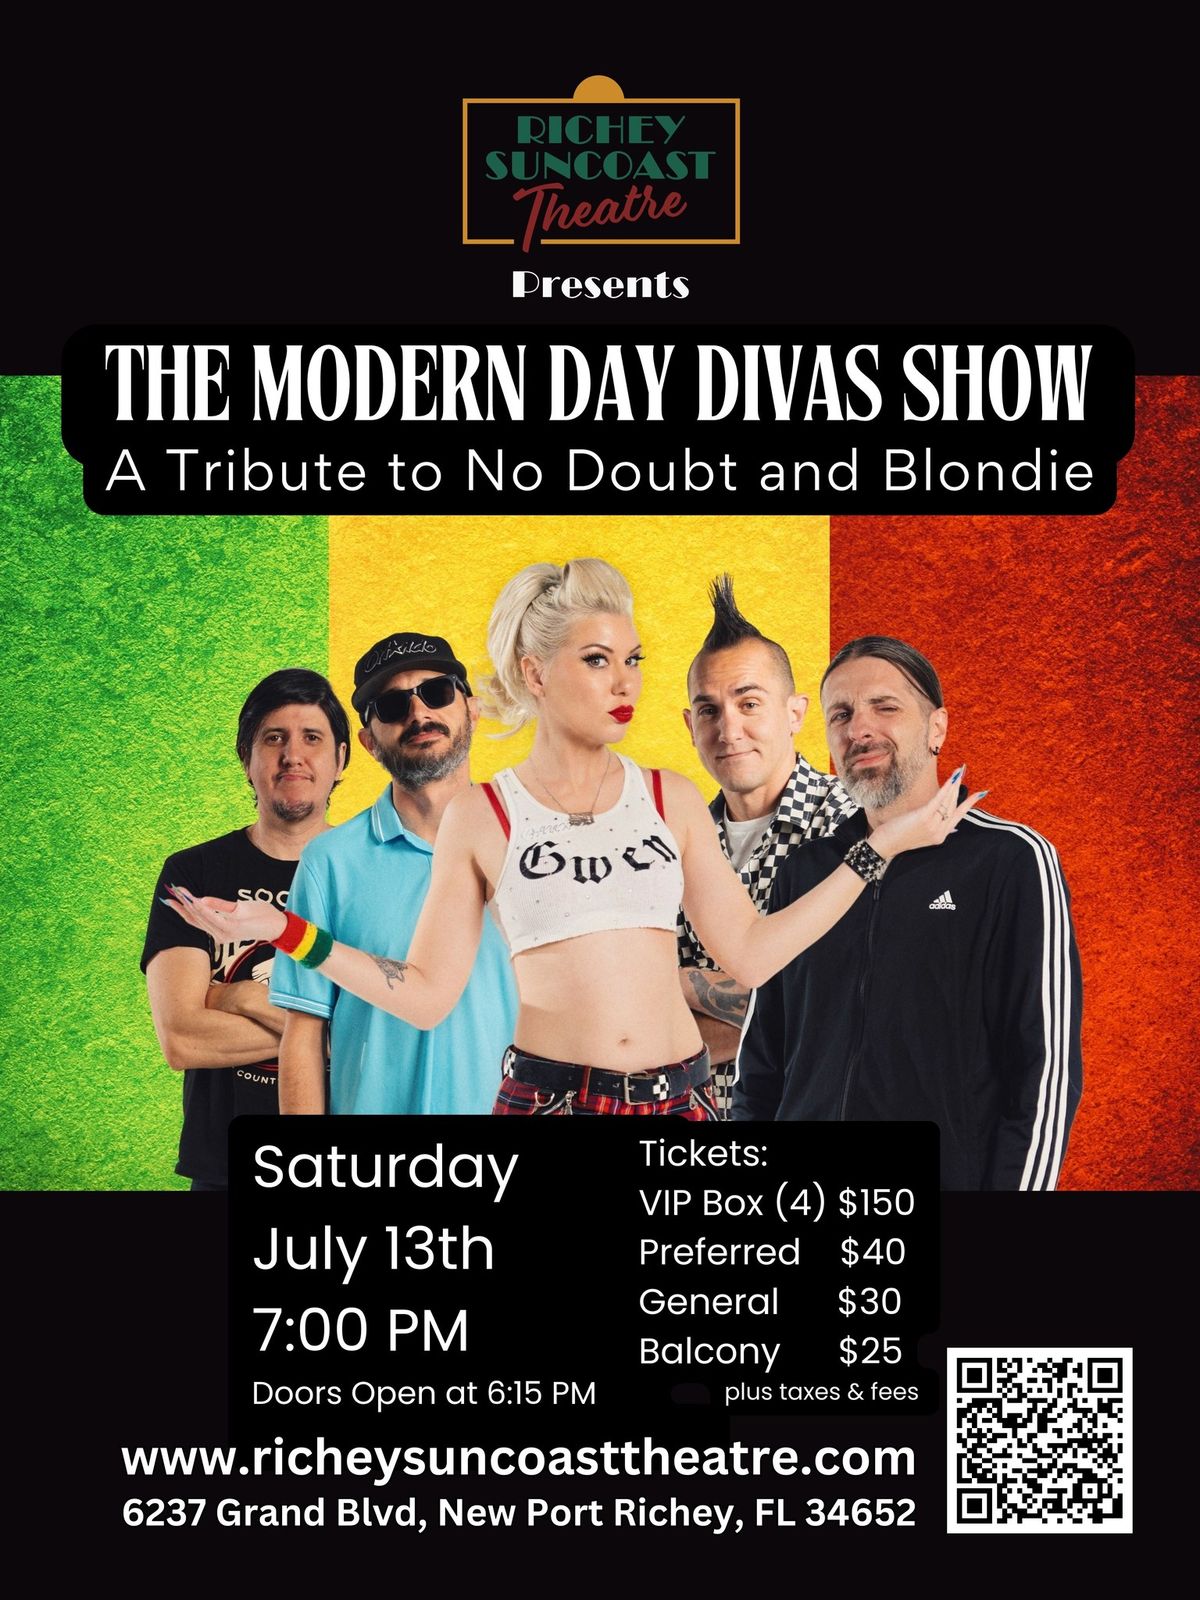 The Modern Day Divas Show - A Tribute to No Doubt and Blondie @ Richey Suncoast Theatre